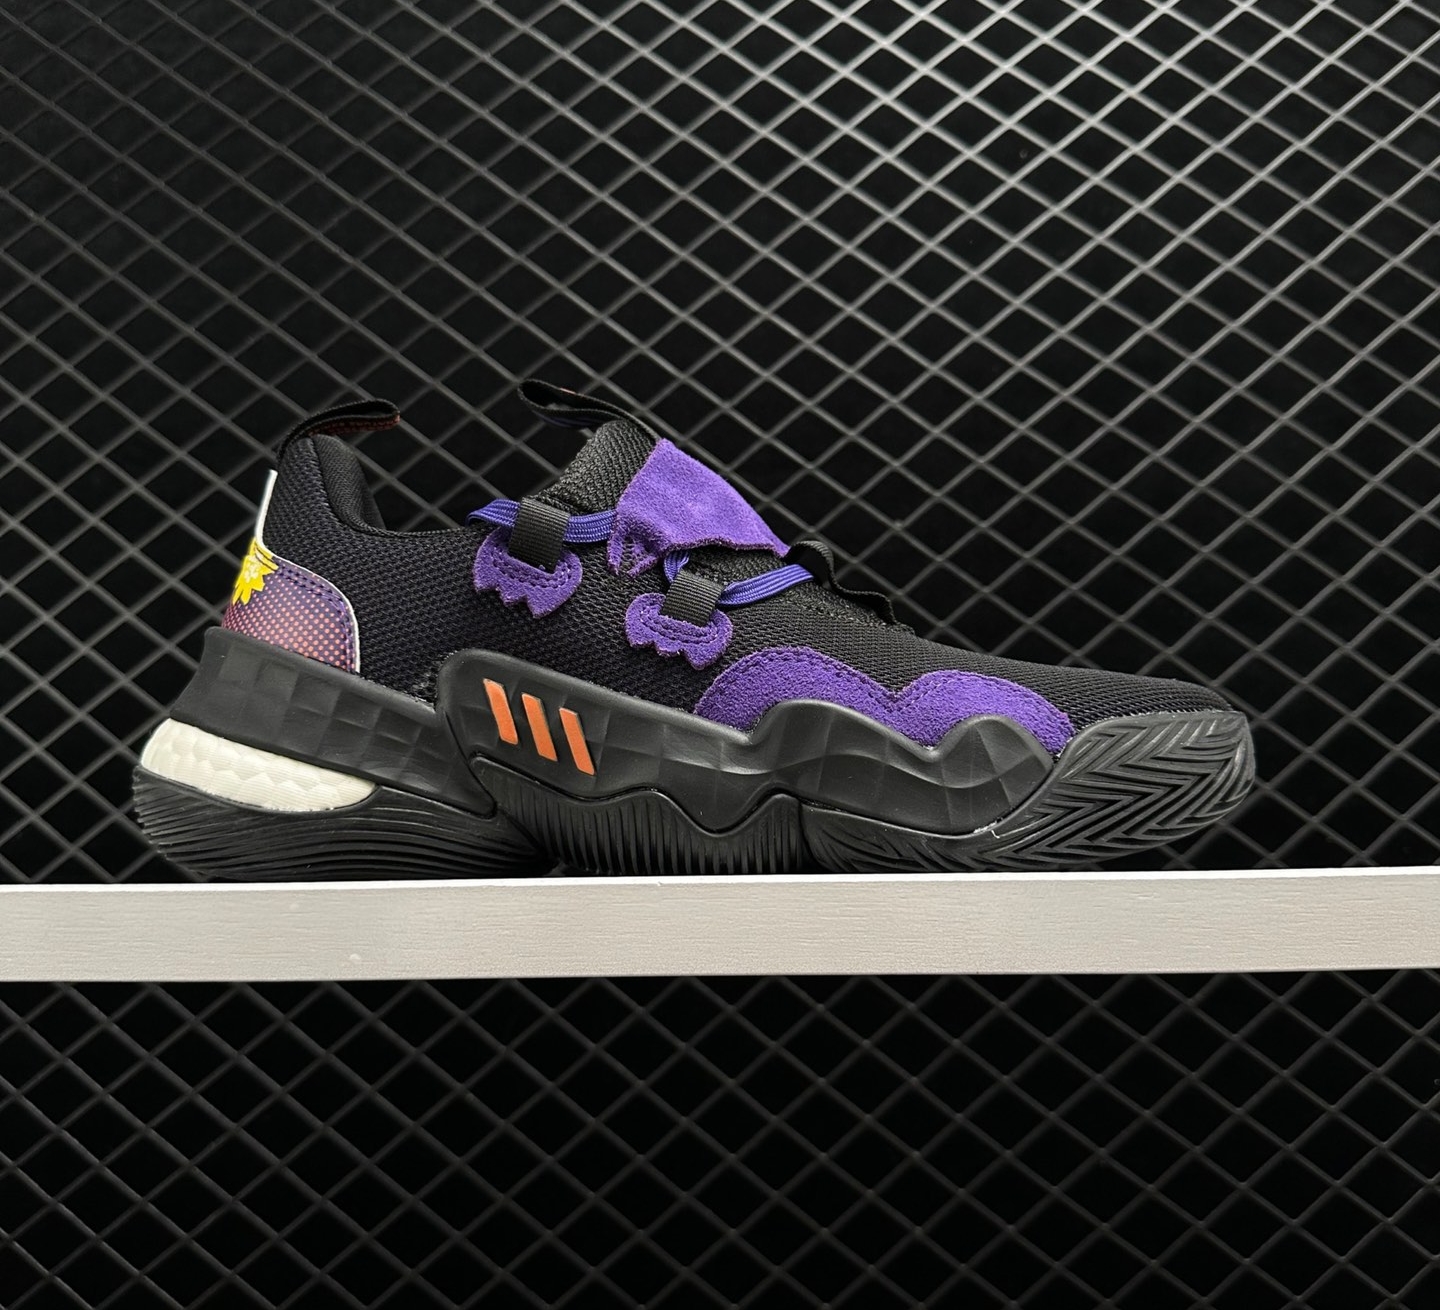 Adidas Trae Young 1 'Black Team College Purple' GZ4627 - Stylish & Functional Athleisure Shoes